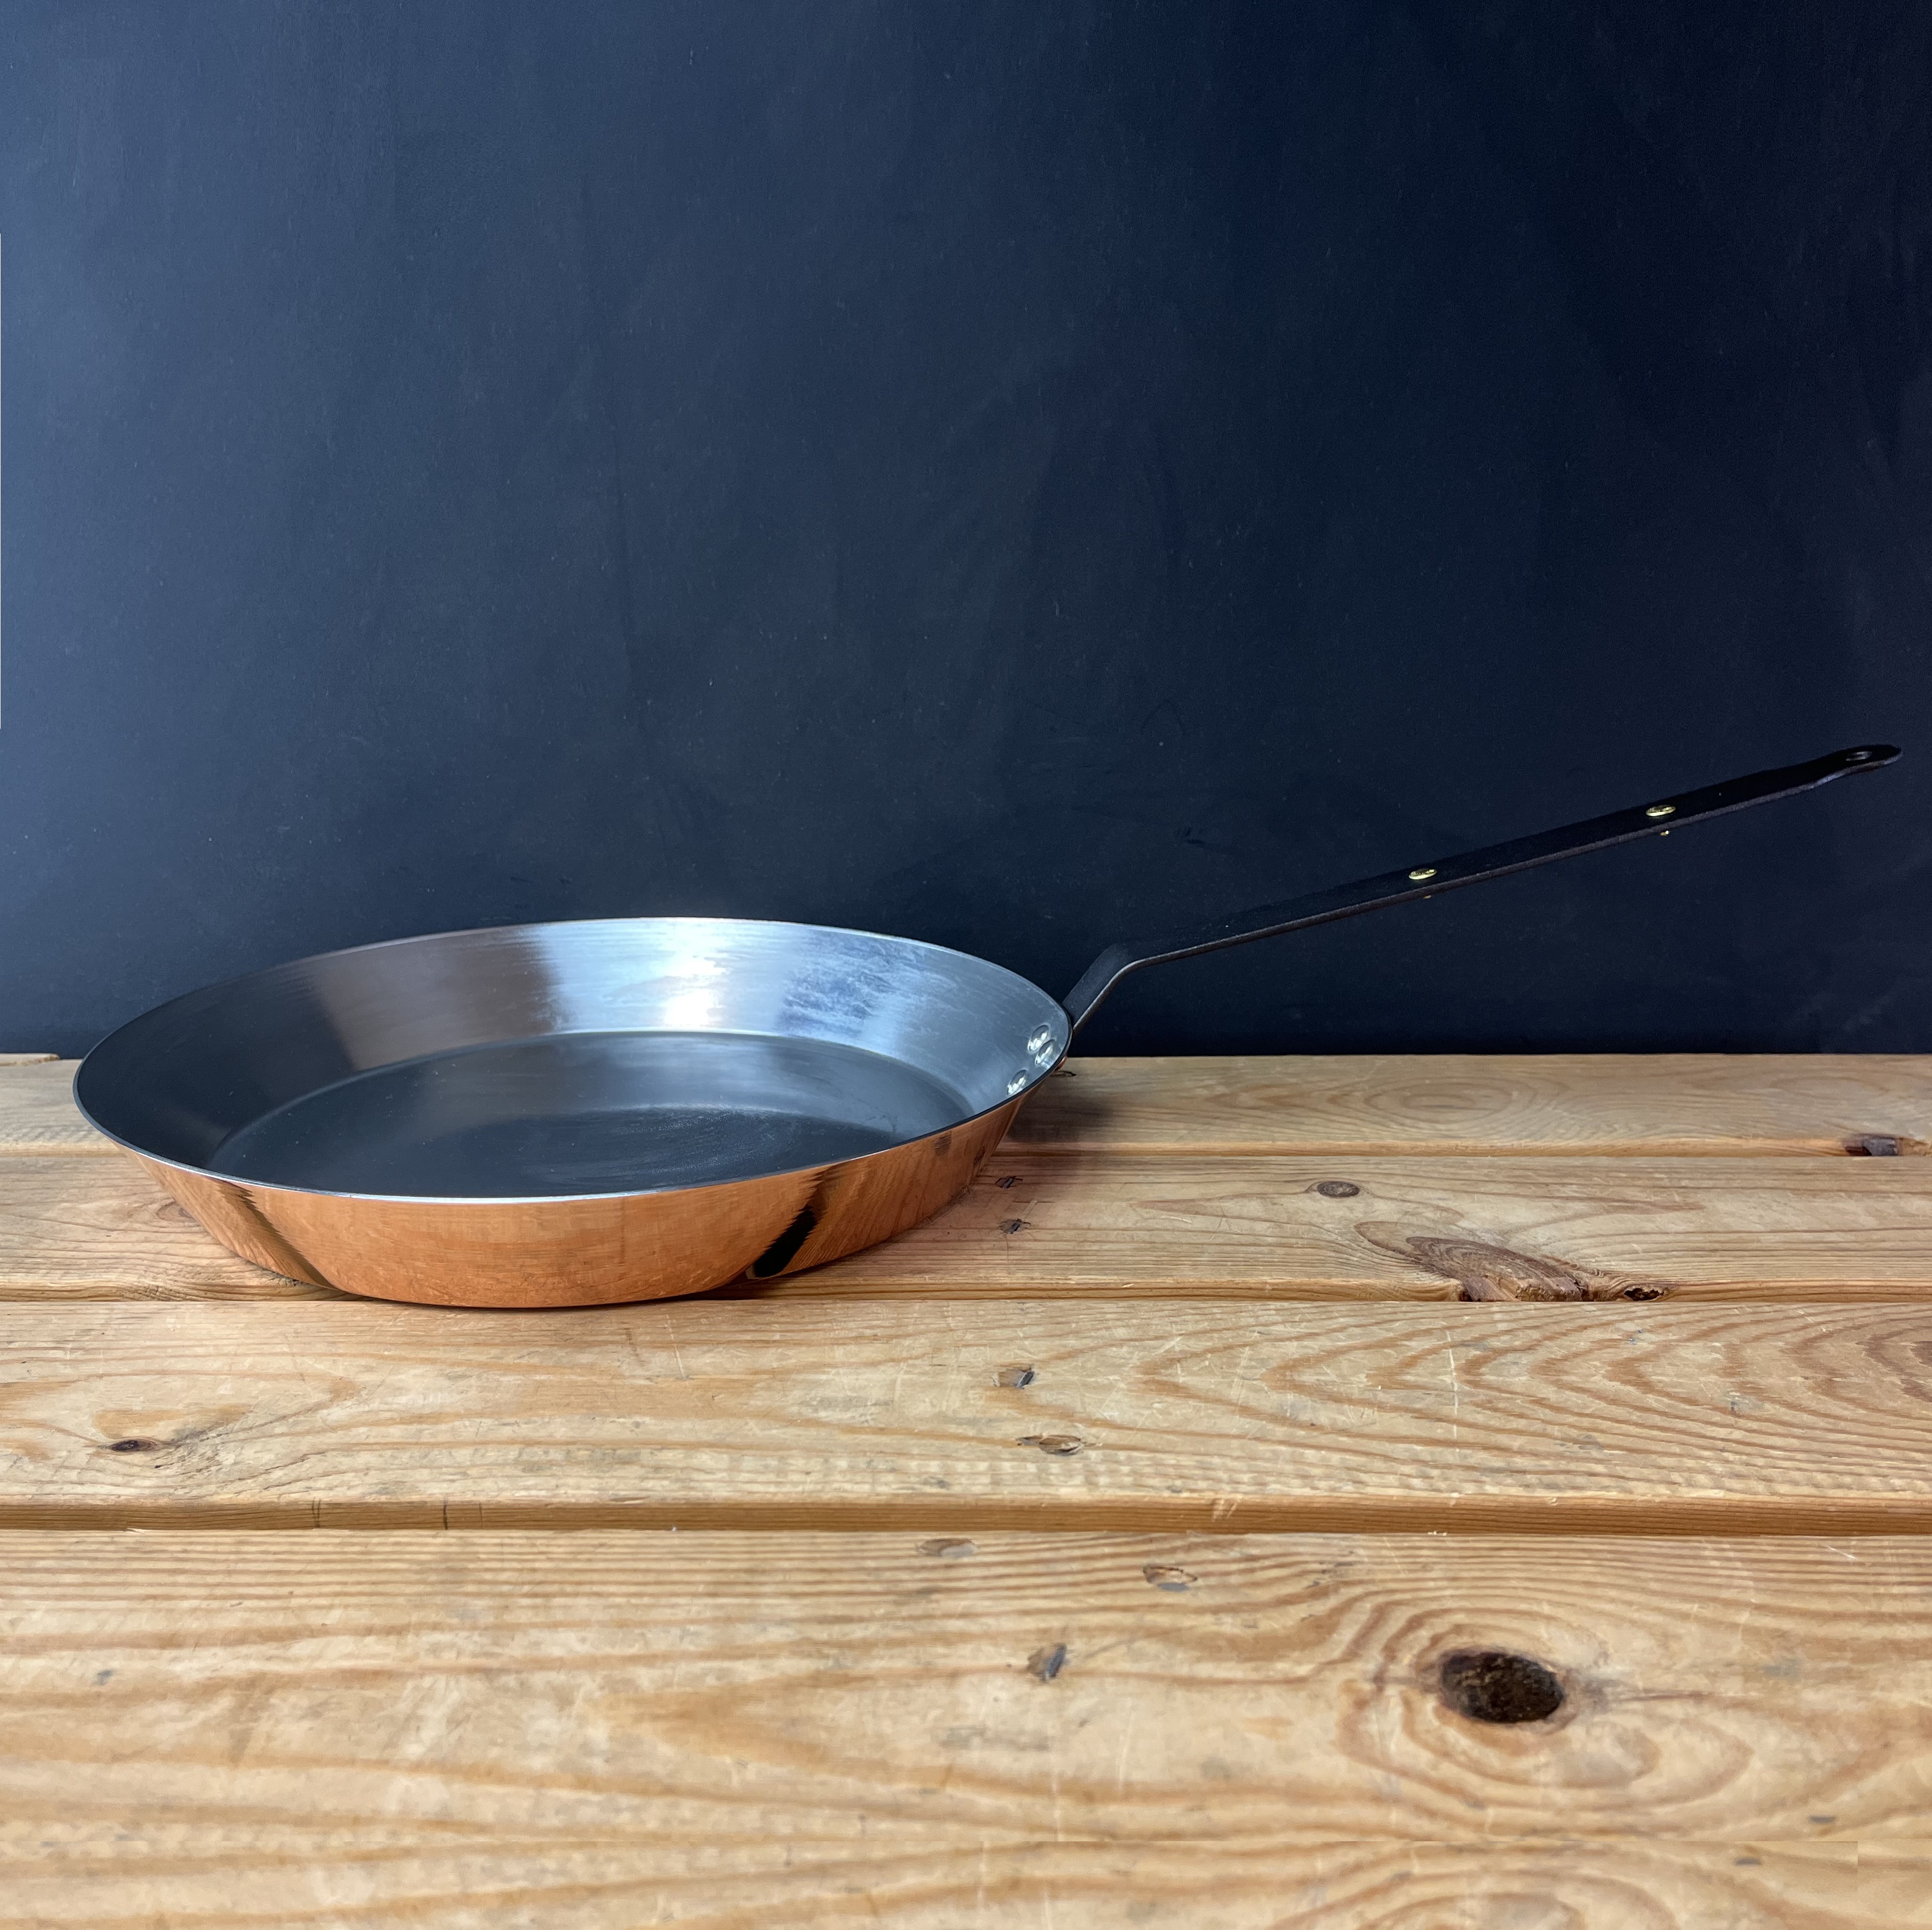 A commissioned long handled frying pan finished today. A shallow